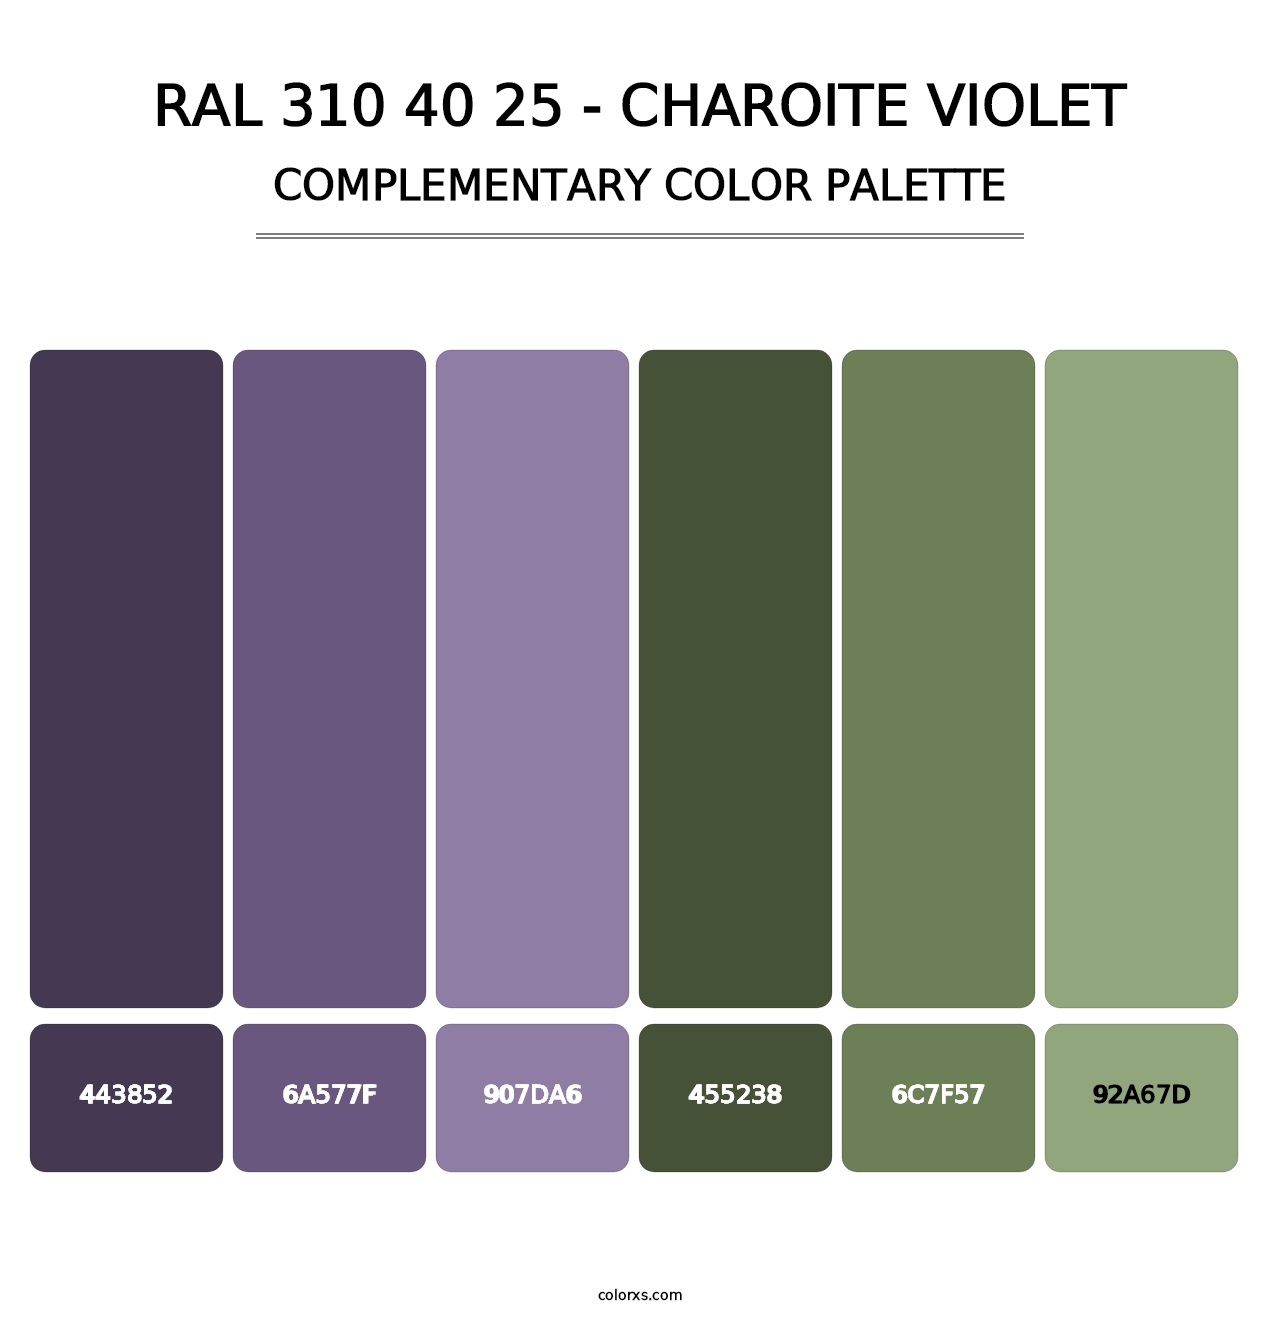 RAL 310 40 25 - Charoite Violet - Complementary Color Palette